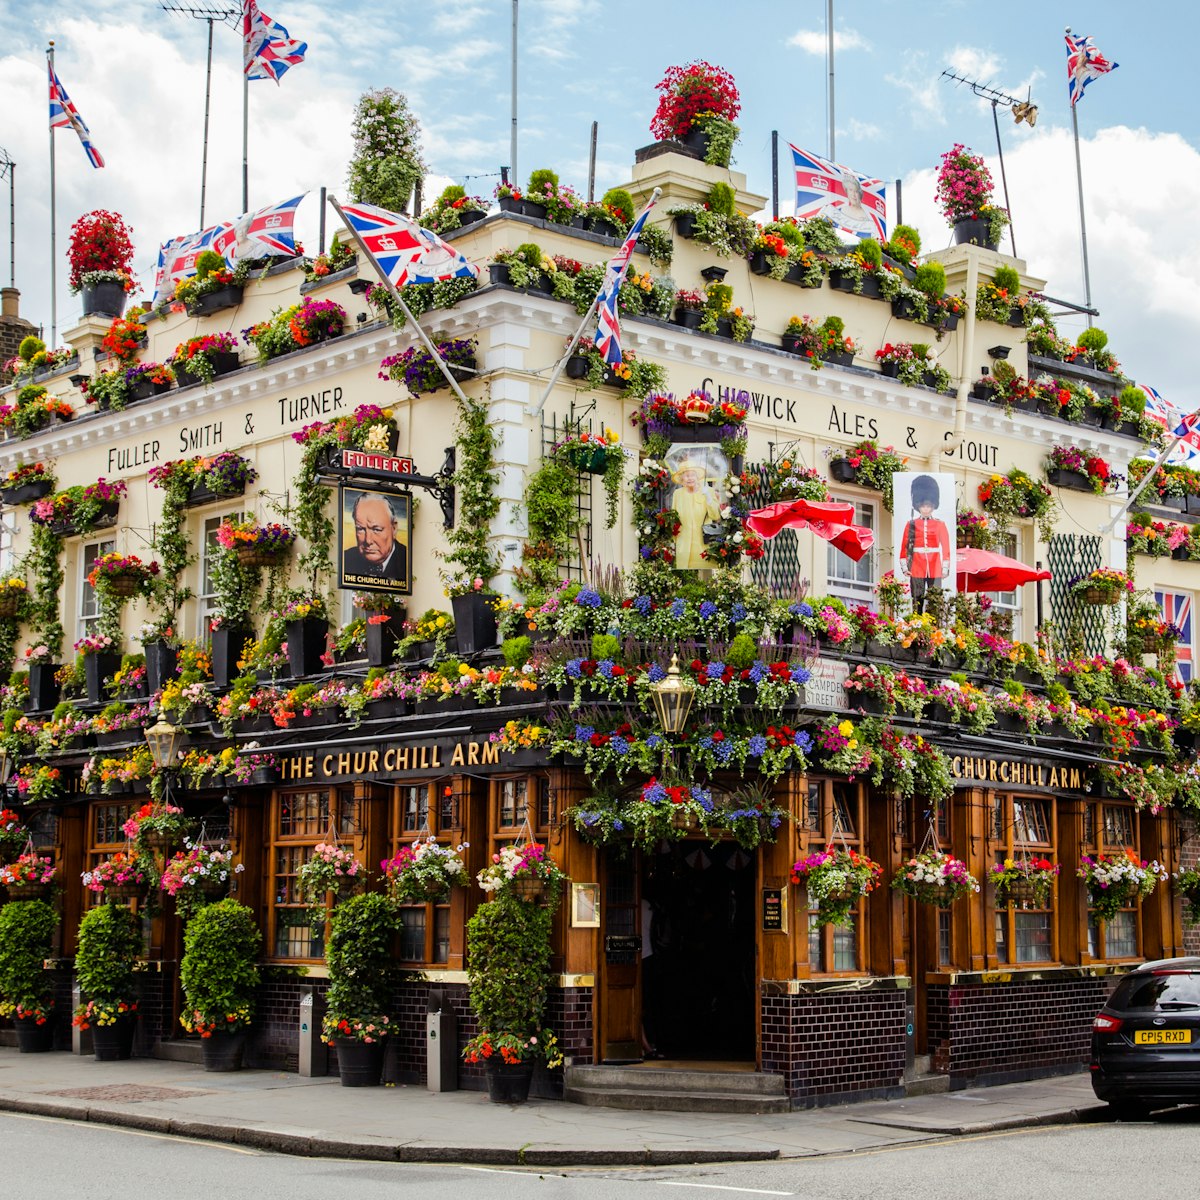 LONDON, UK - 28TH JUNE 2016: A view of the outside of the Churchill Arms in London. Large amounts of flowers and UK decorations can be seen on the exterior.; Shutterstock ID 449355649; Your name (First / Last): Lauren Gillmore; GL account no.: 56530; Netsuite department name: o; Full Product or Project name including edition: 65050/ Online Design /LaurenGillmore/POI